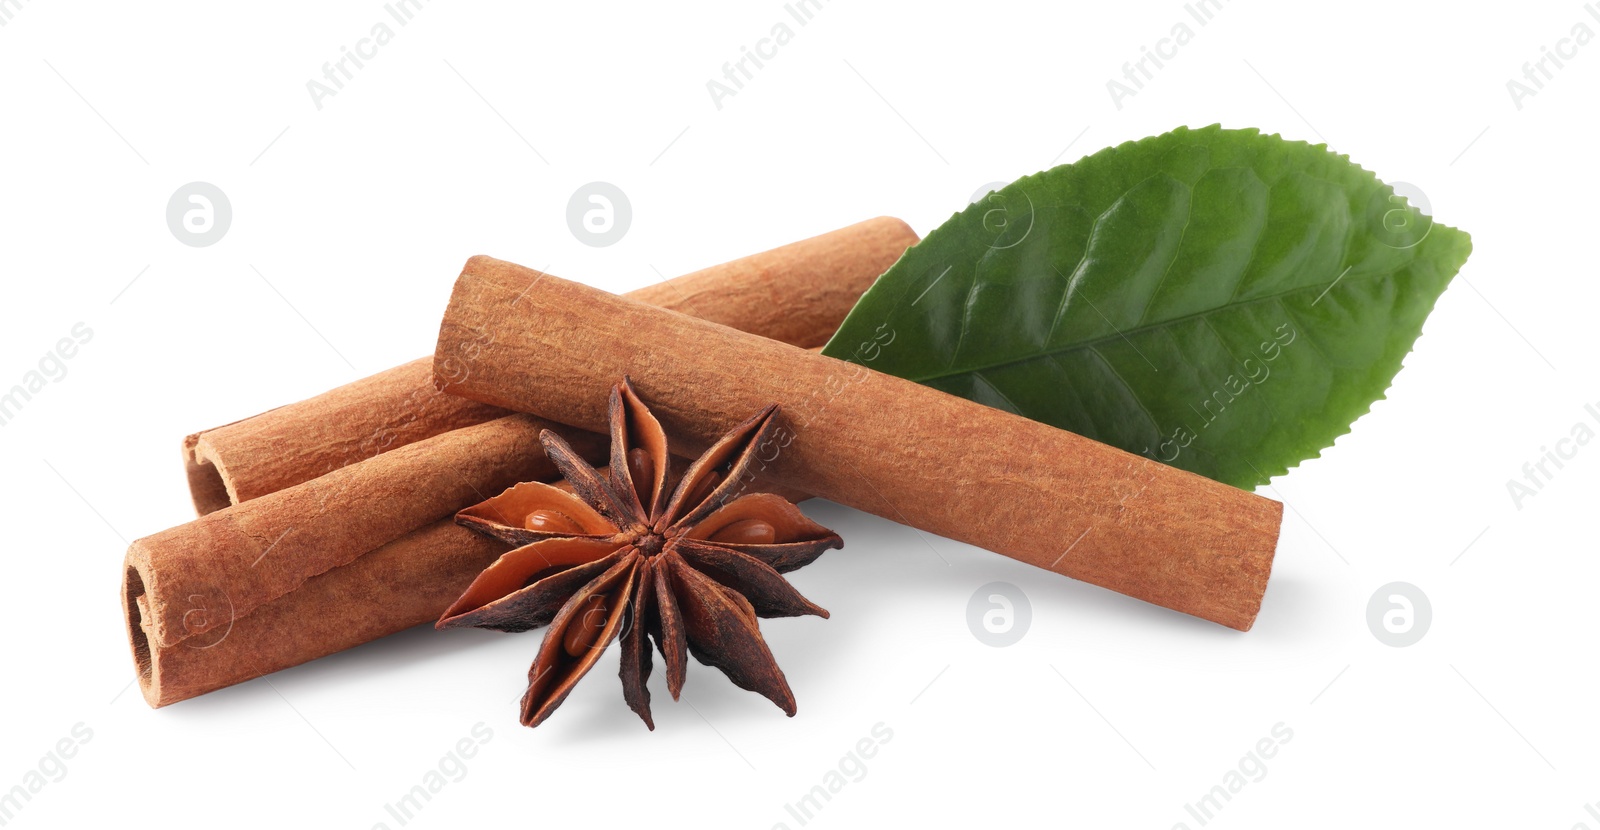 Photo of Aromatic cinnamon sticks, anise star and green leaf isolated on white